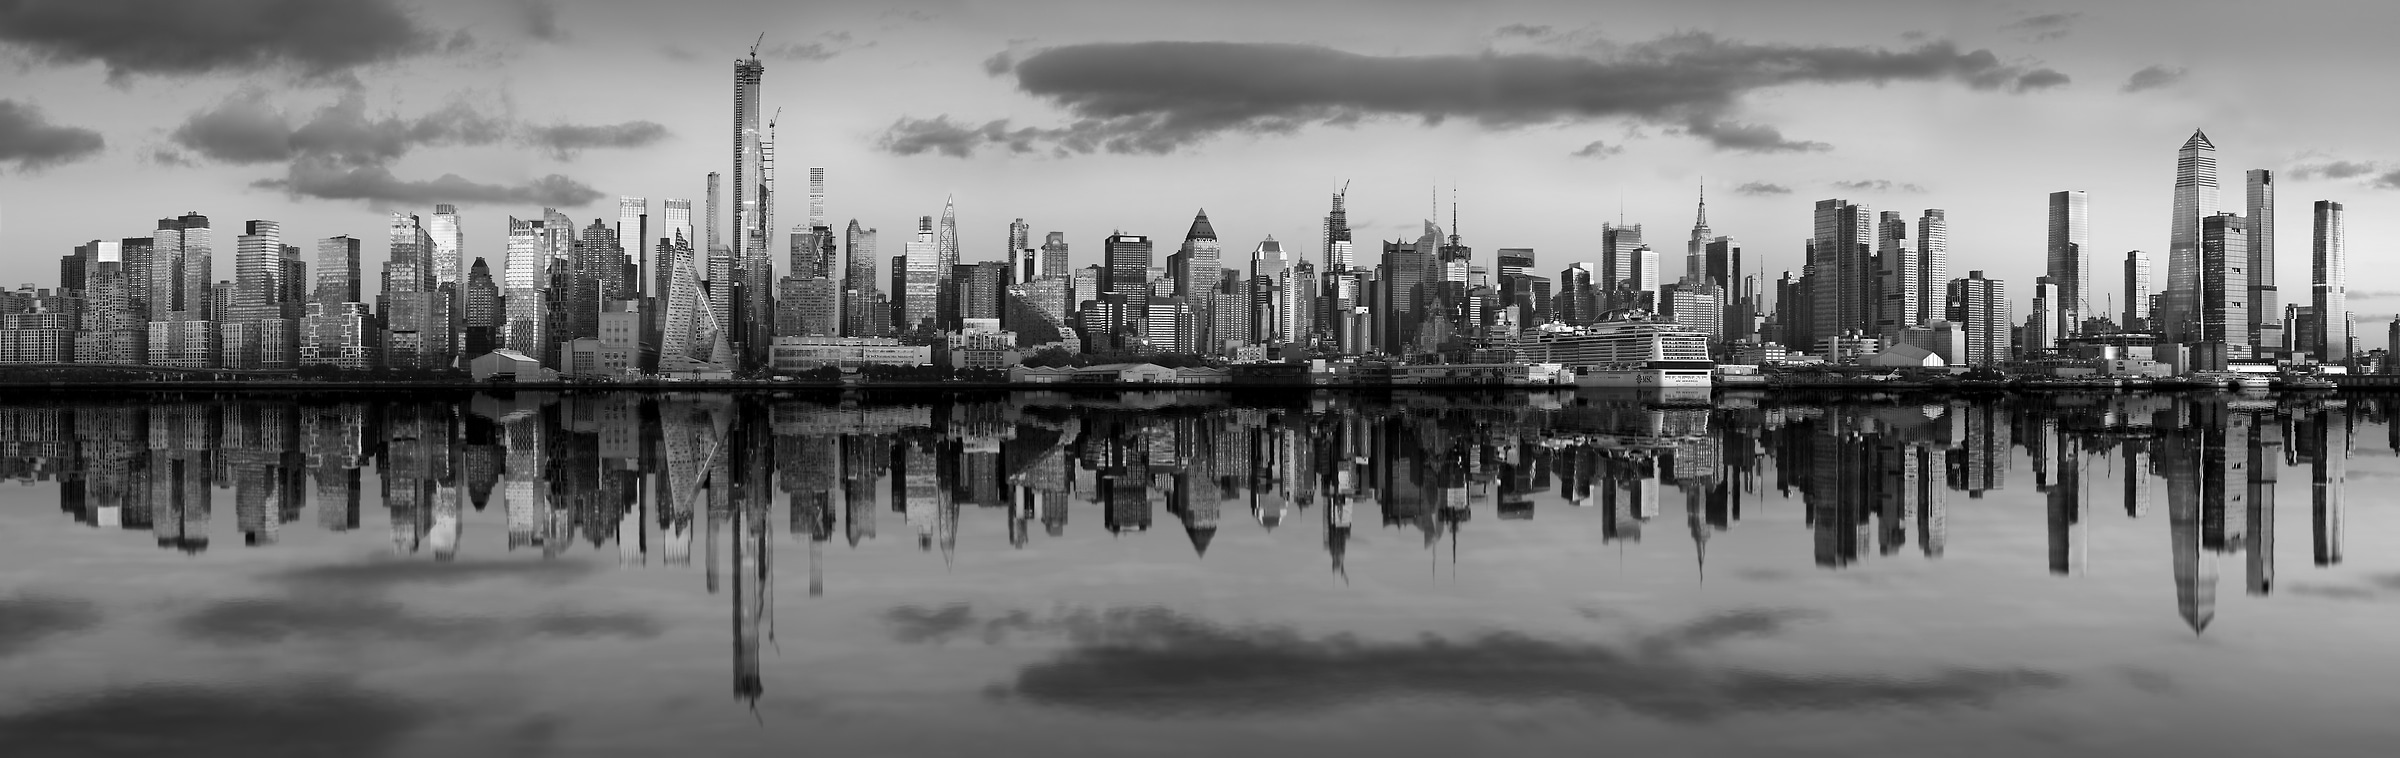 922 megapixels! A very high resolution, black & white VAST photo print of the New York skyline at sunset reflecting in the Hudson River; panorama photograph created by Phil Crawshay in New York, Manhattan